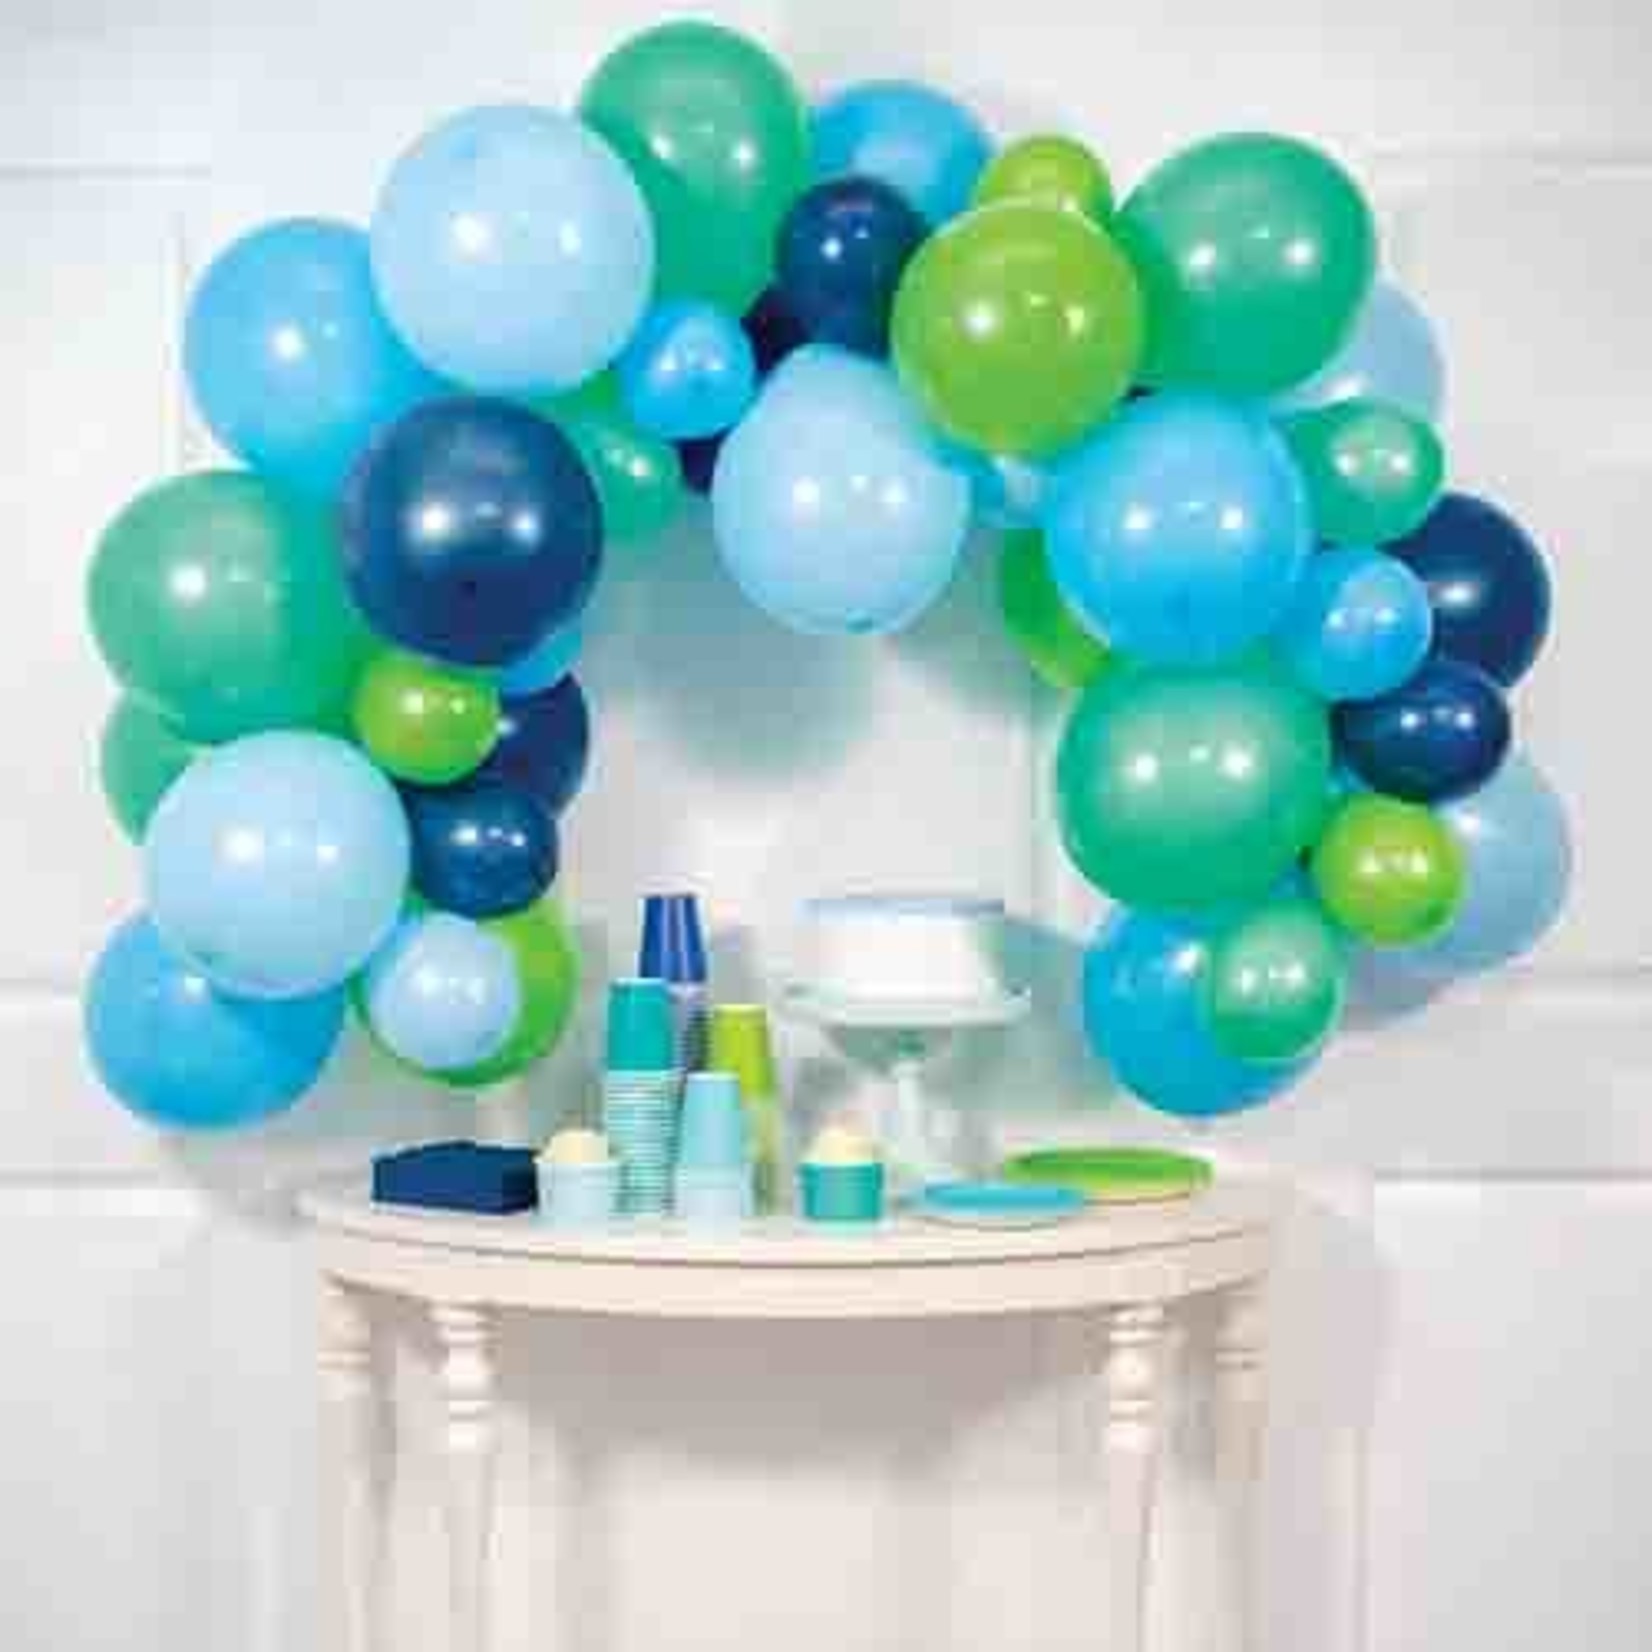 Creative Converting Blue & Green Balloon Decorating Garland - 6ft. (Balloons Included)